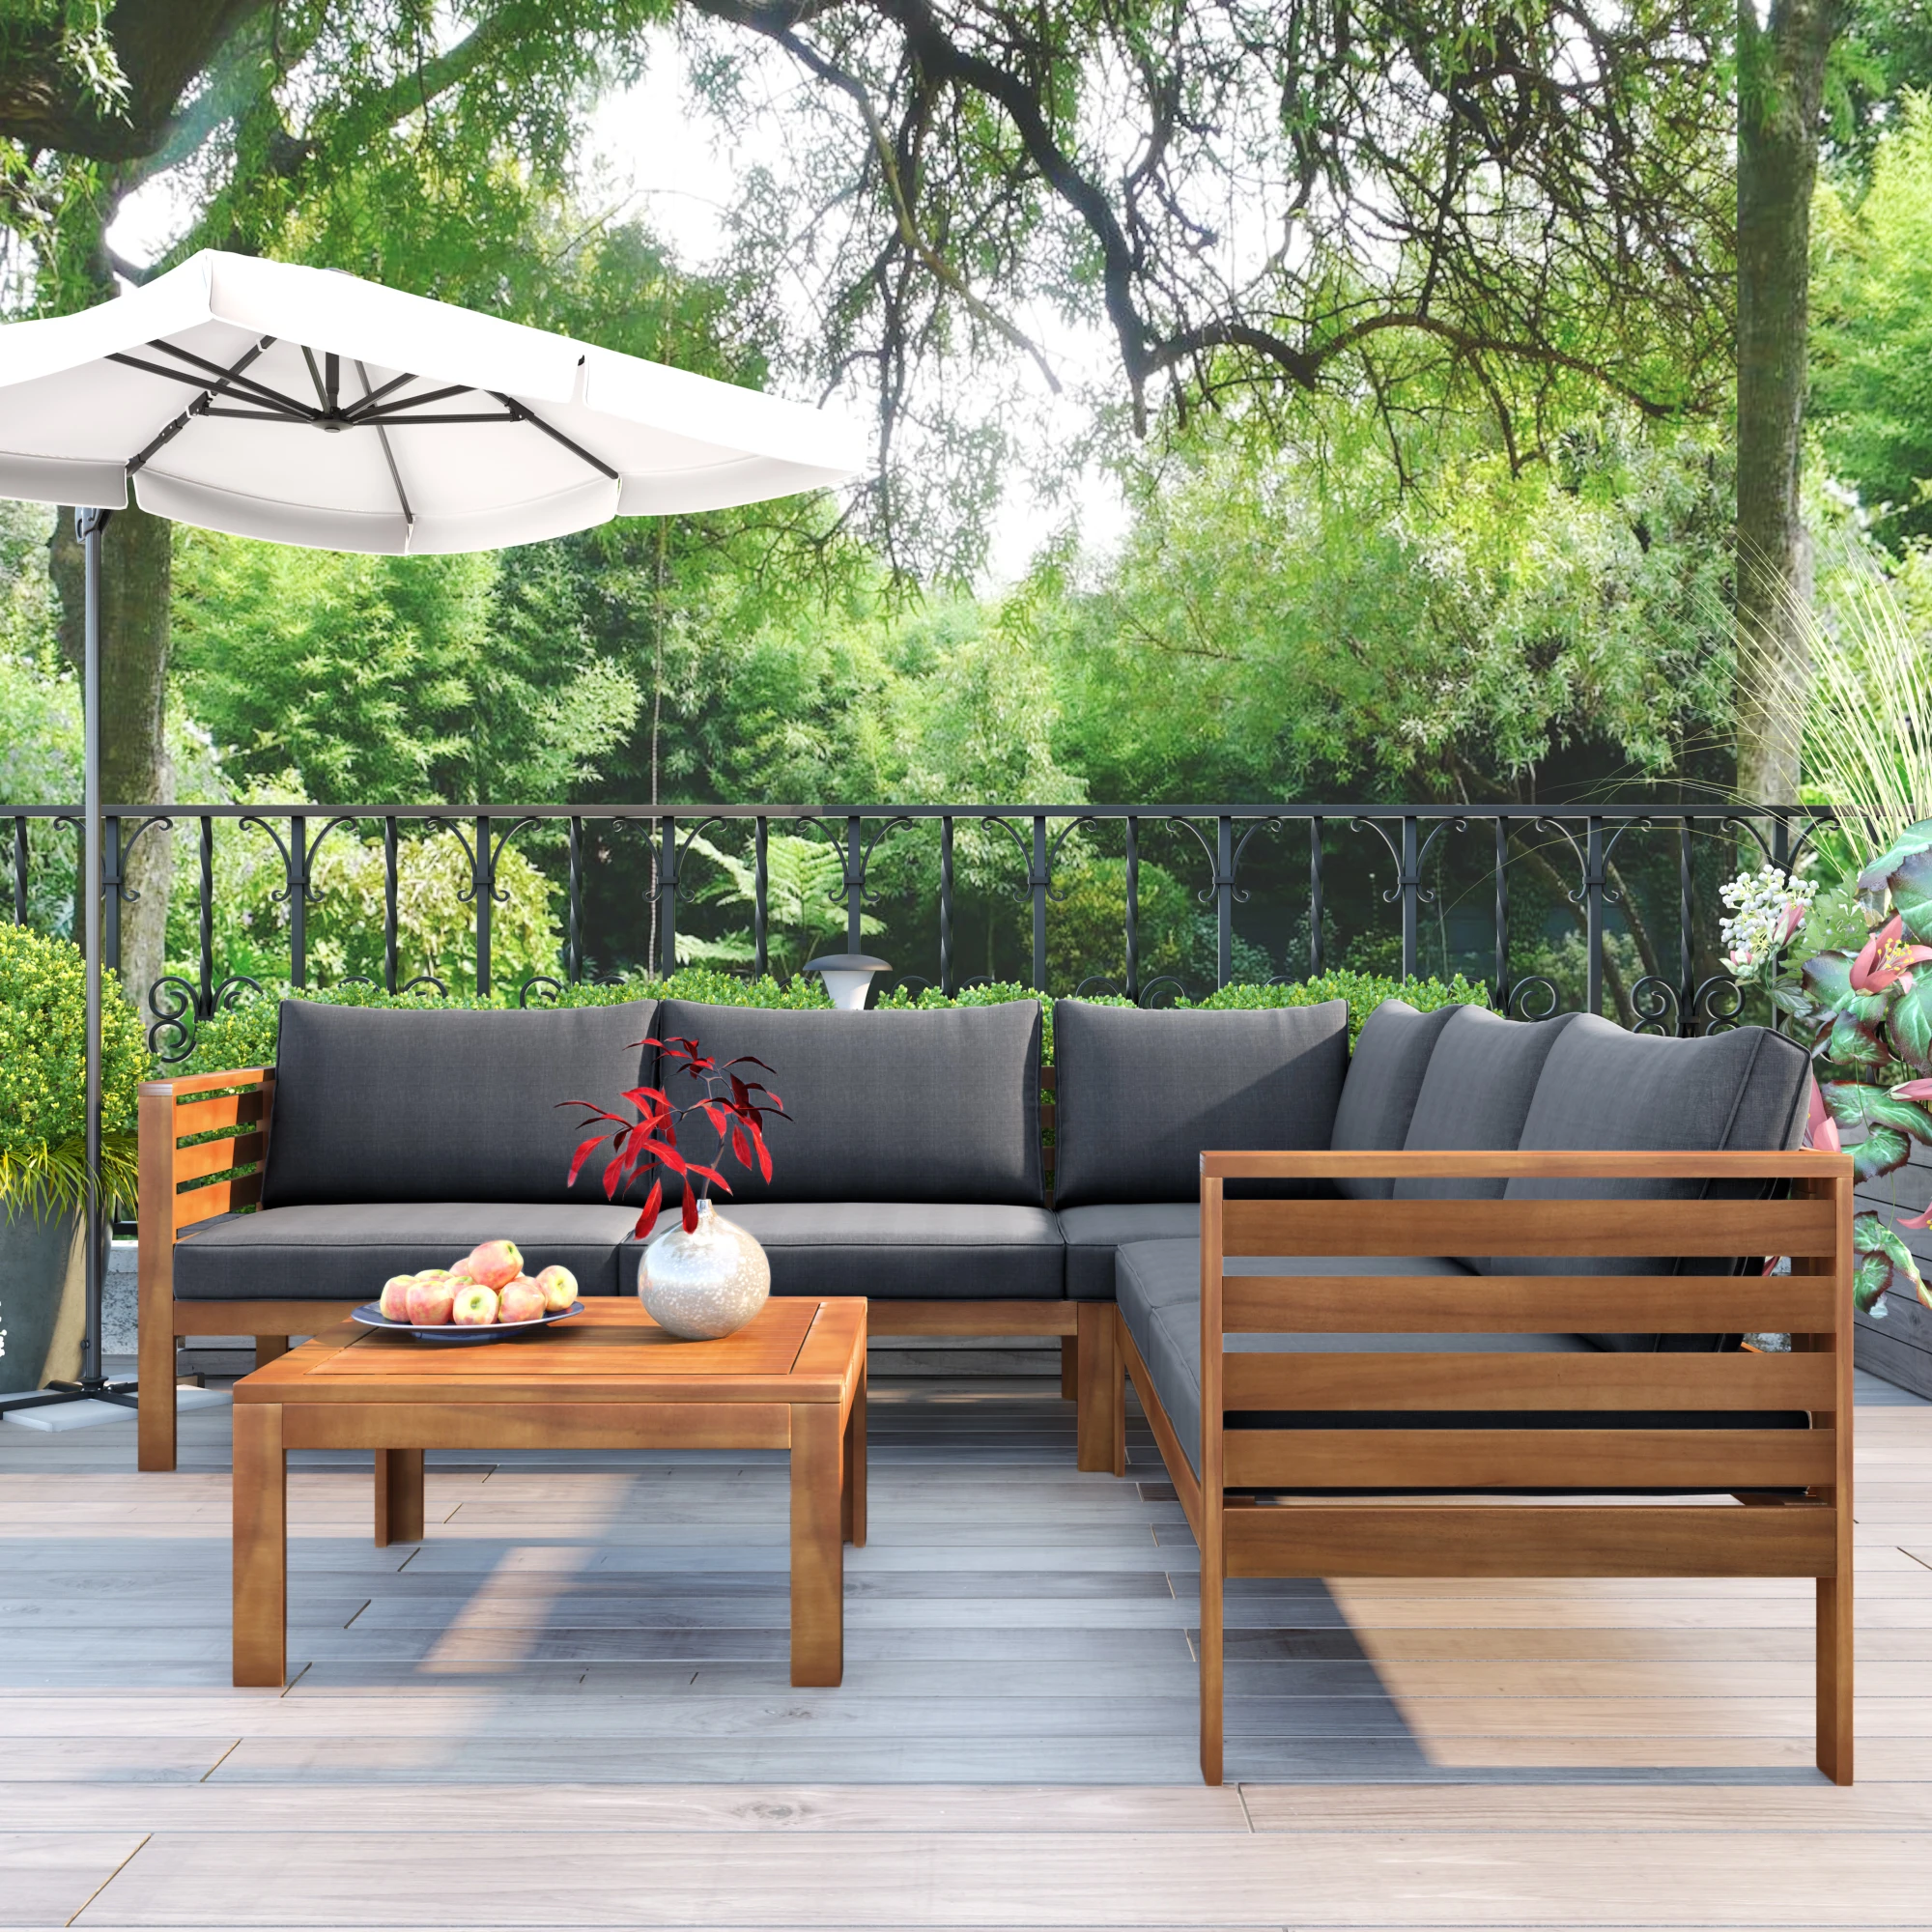 Wood Structure Outdoor Sofa Set with gray Cushions Exotic design Water-resistant and UV Protected Texture Strong Metal Accessori